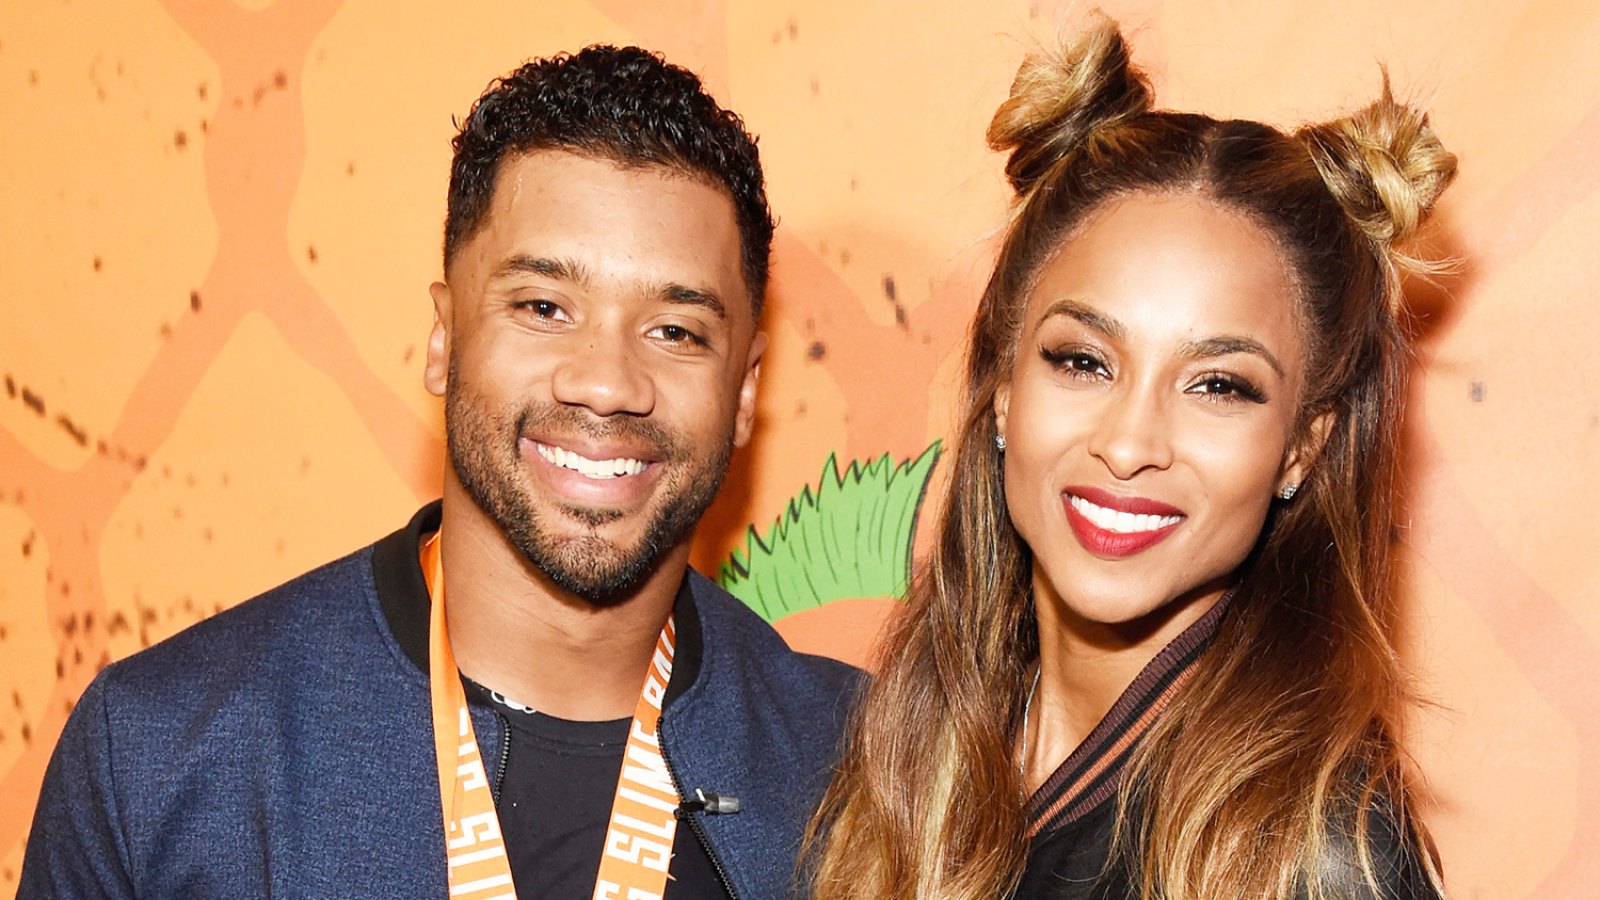 Russell Wilson and Ciara